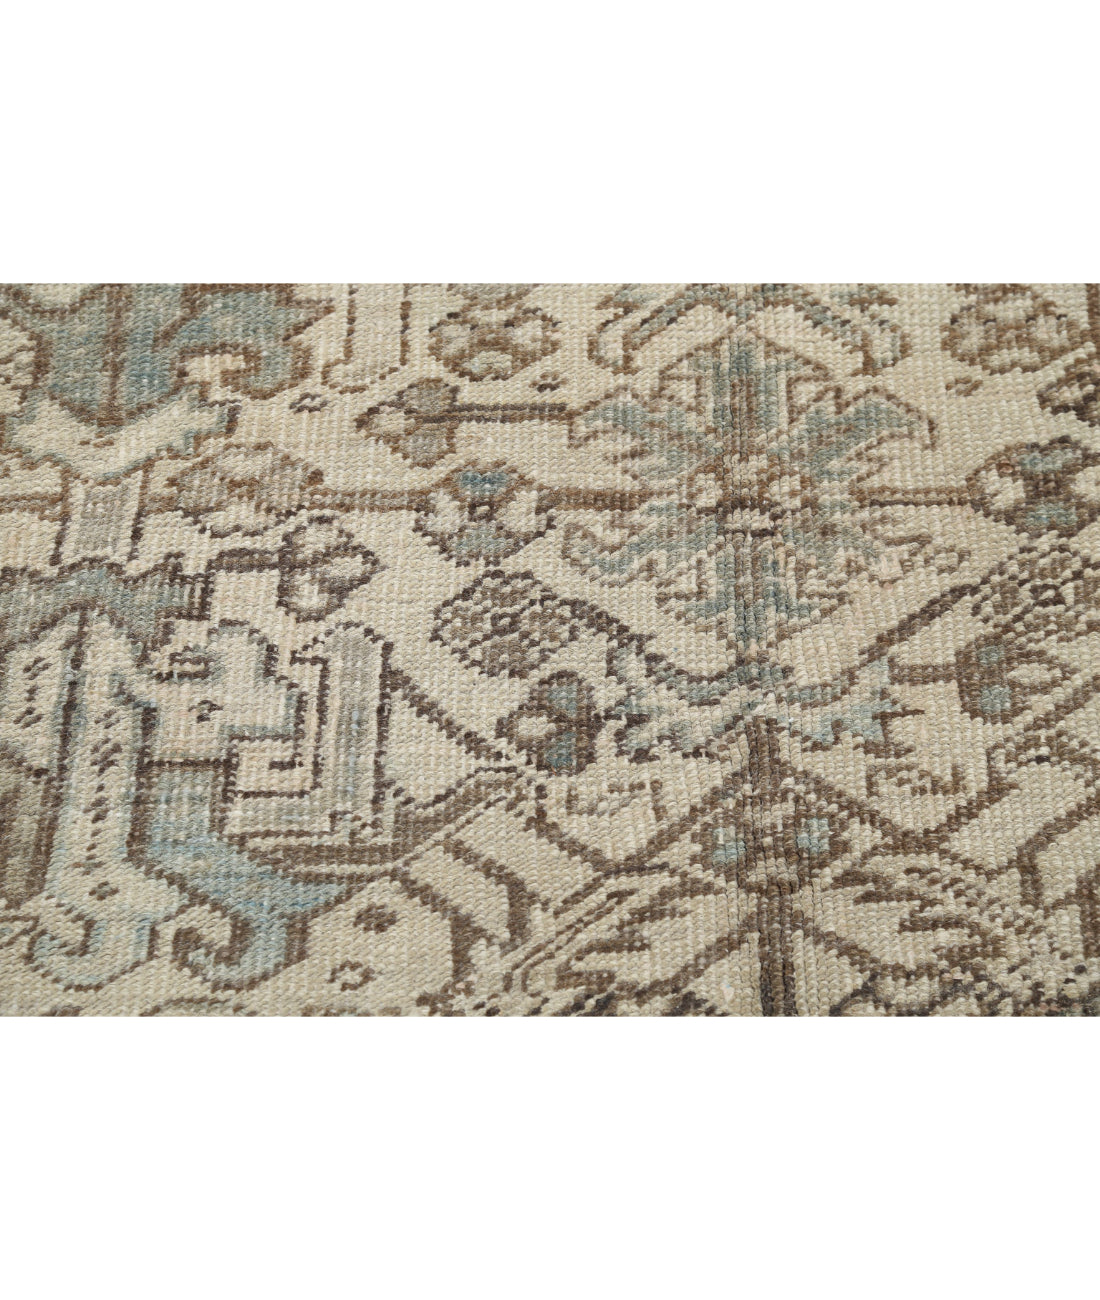 Hand Knotted Antique Persian Heriz Wool Rug - 6'10'' x 8'4'' 6'10'' x 8'4'' (205 X 250) / Ivory / Grey